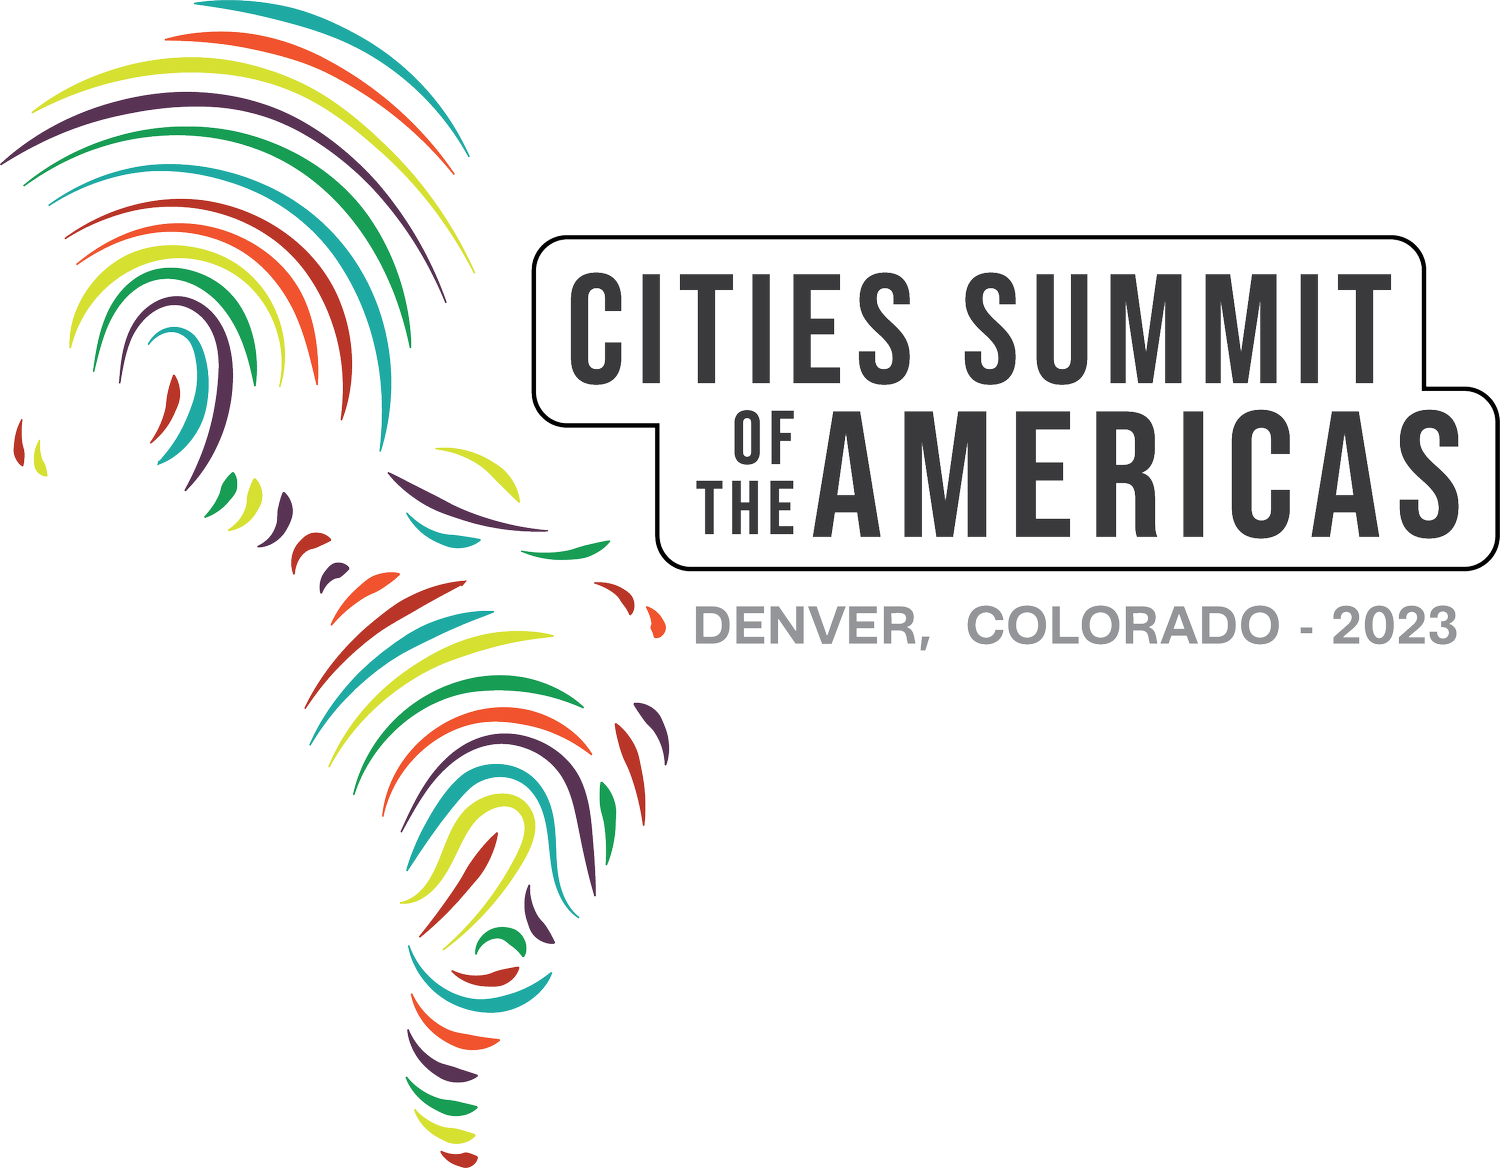 Cities Summit of the Americas